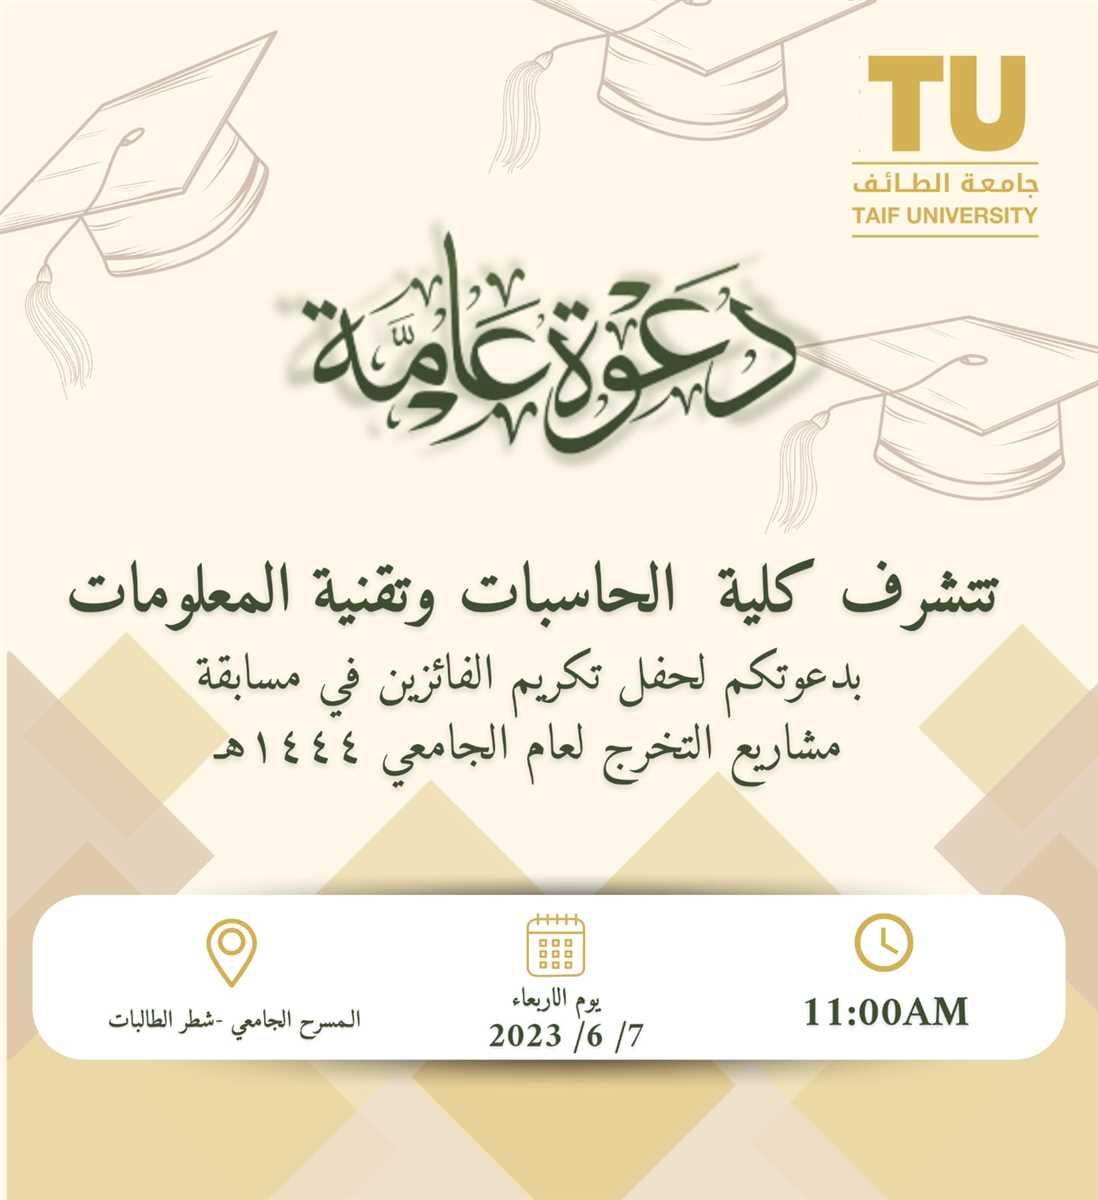 An invitation to attend a ceremony honoring the winners of the graduation projects competition for the academic year 1444